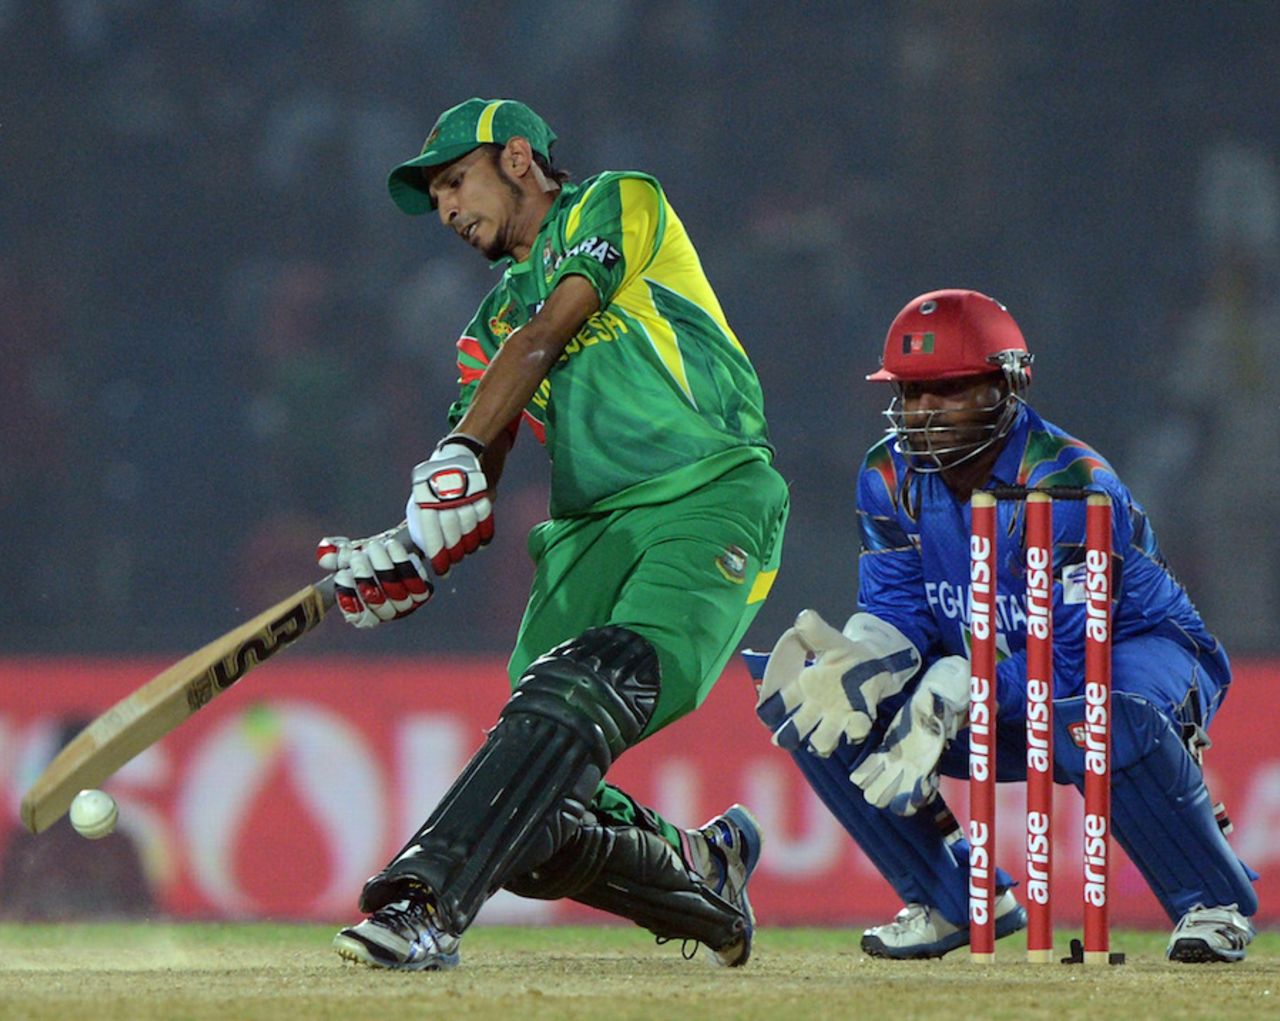 Nasir Hossain looks to hit one to the leg side, Bangladesh v Afghanistan, Asia Cup, Fatullah, March 1, 2014